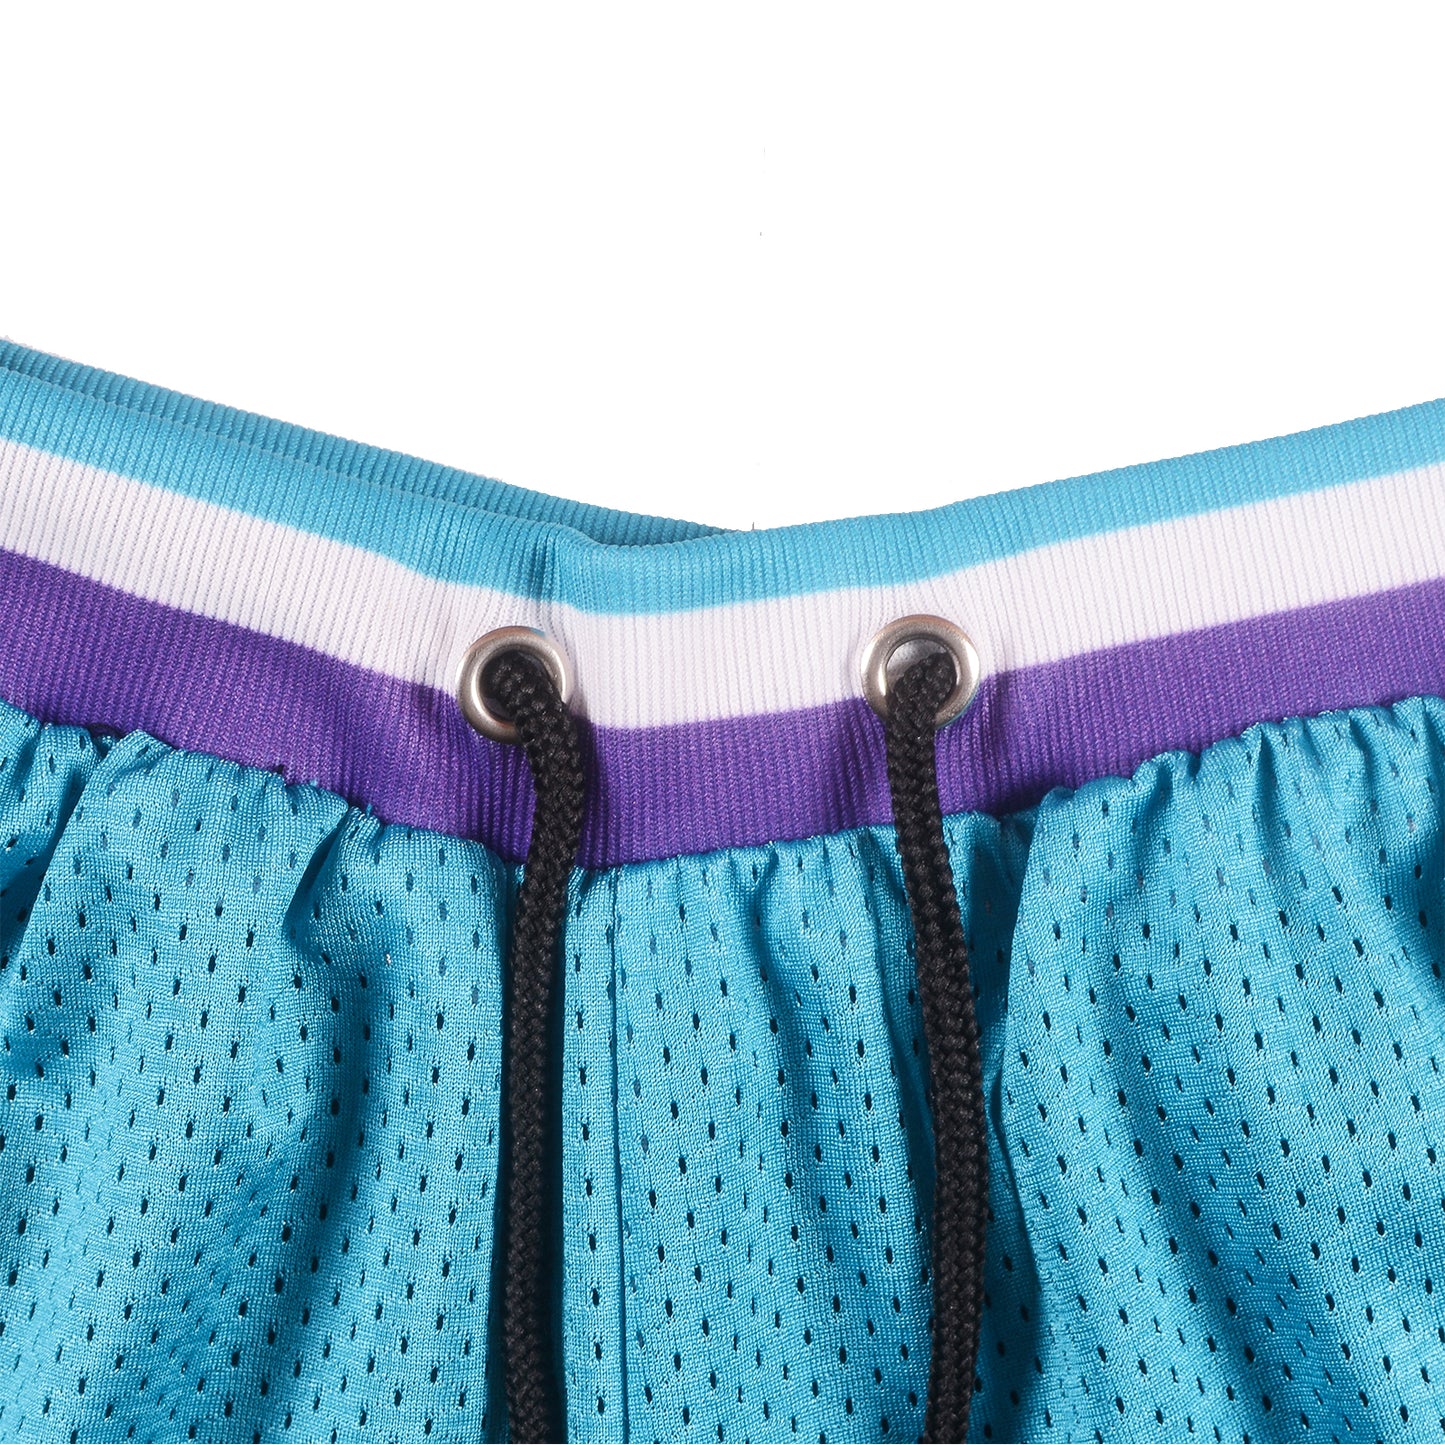 F4m Jam Shorts in Teal